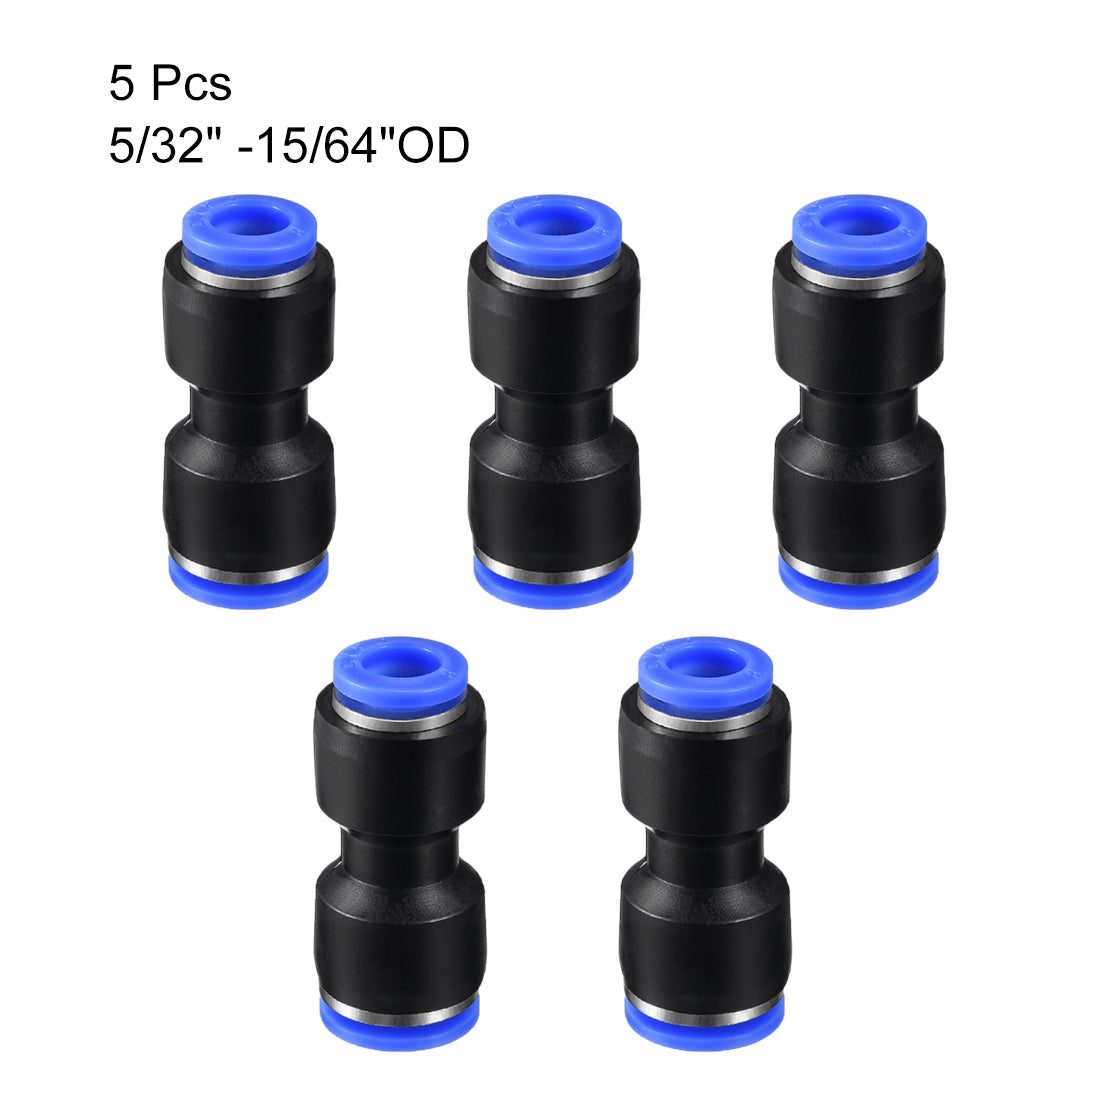 uxcell Uxcell 5Pcs Push to Connect Fittings Tube Connect 5/32" -15/64" Straight OD Push Fit Fittings Tube Fittings Push Lock Blue